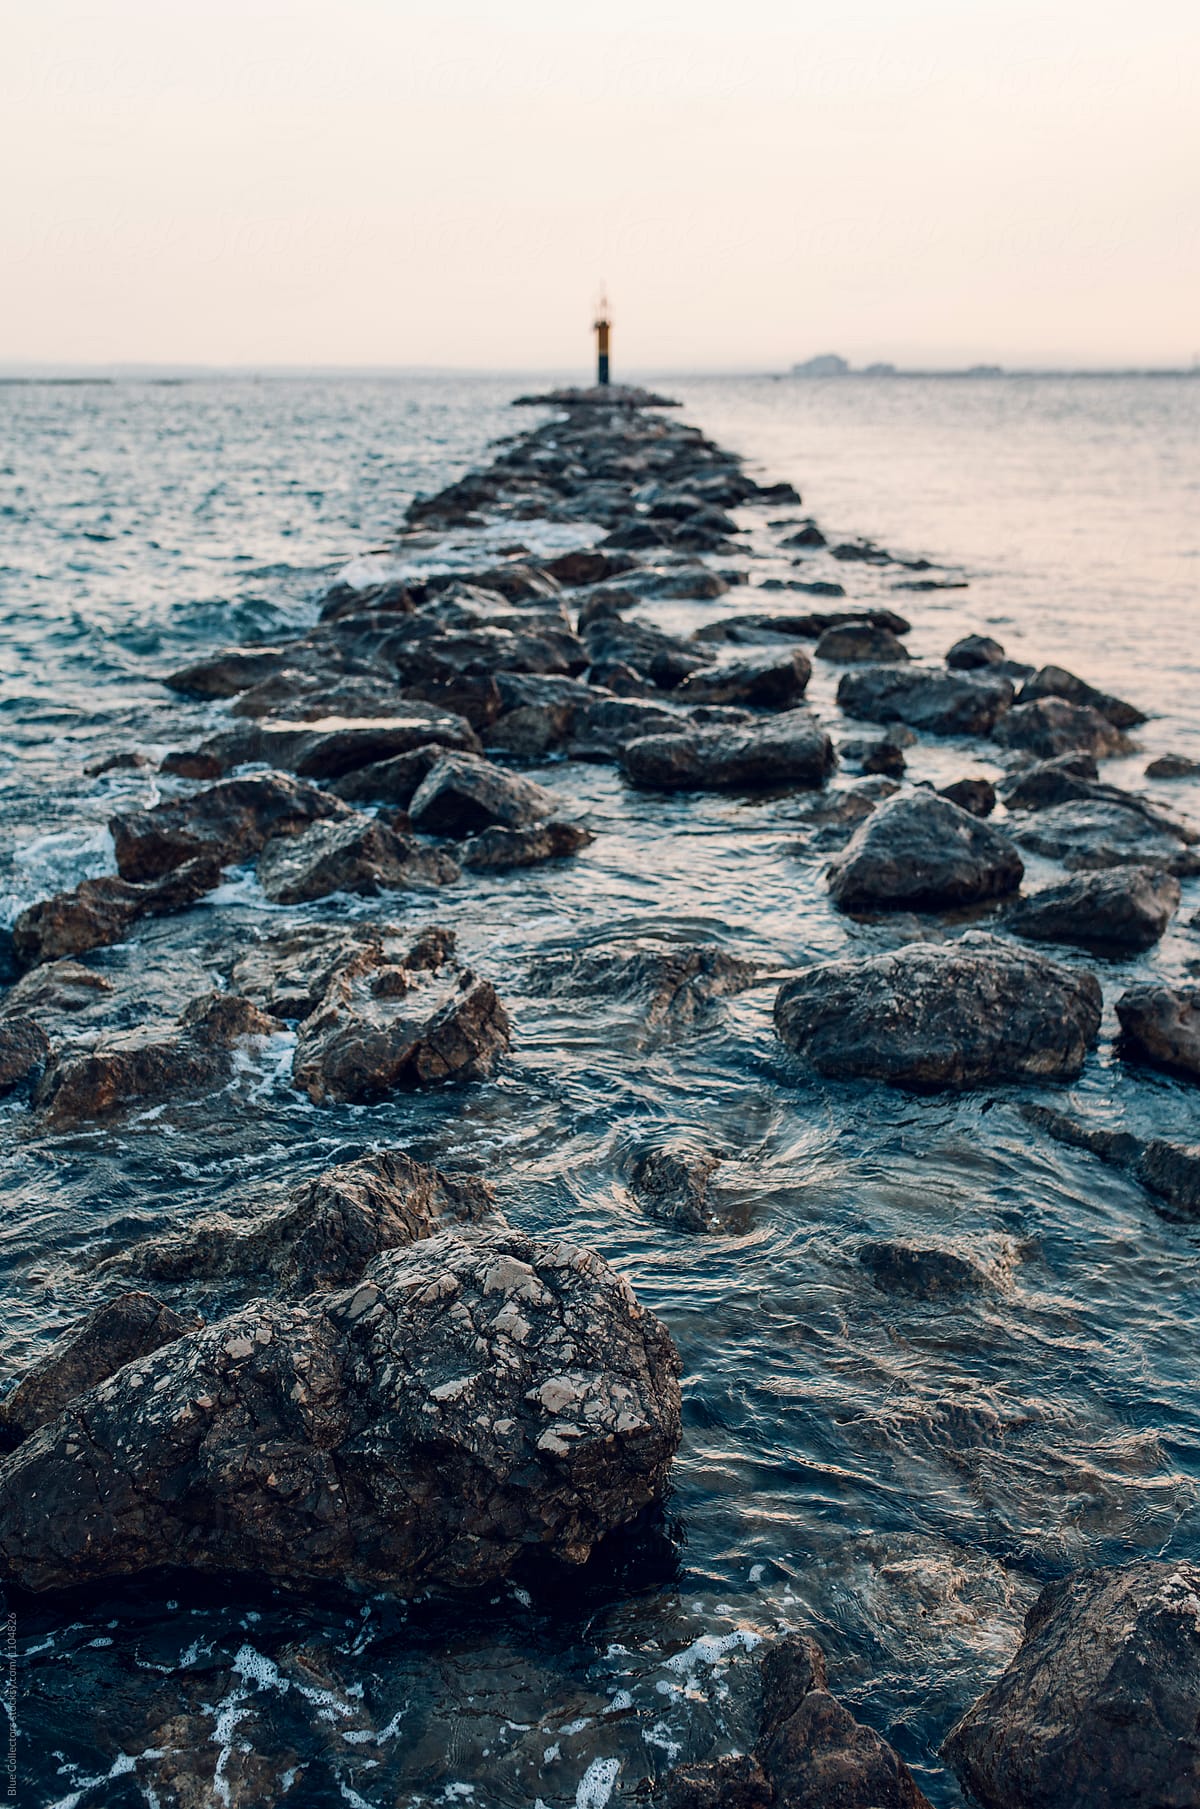 A lighthouse at sunset surrounded by water and rocky path, out of focus.